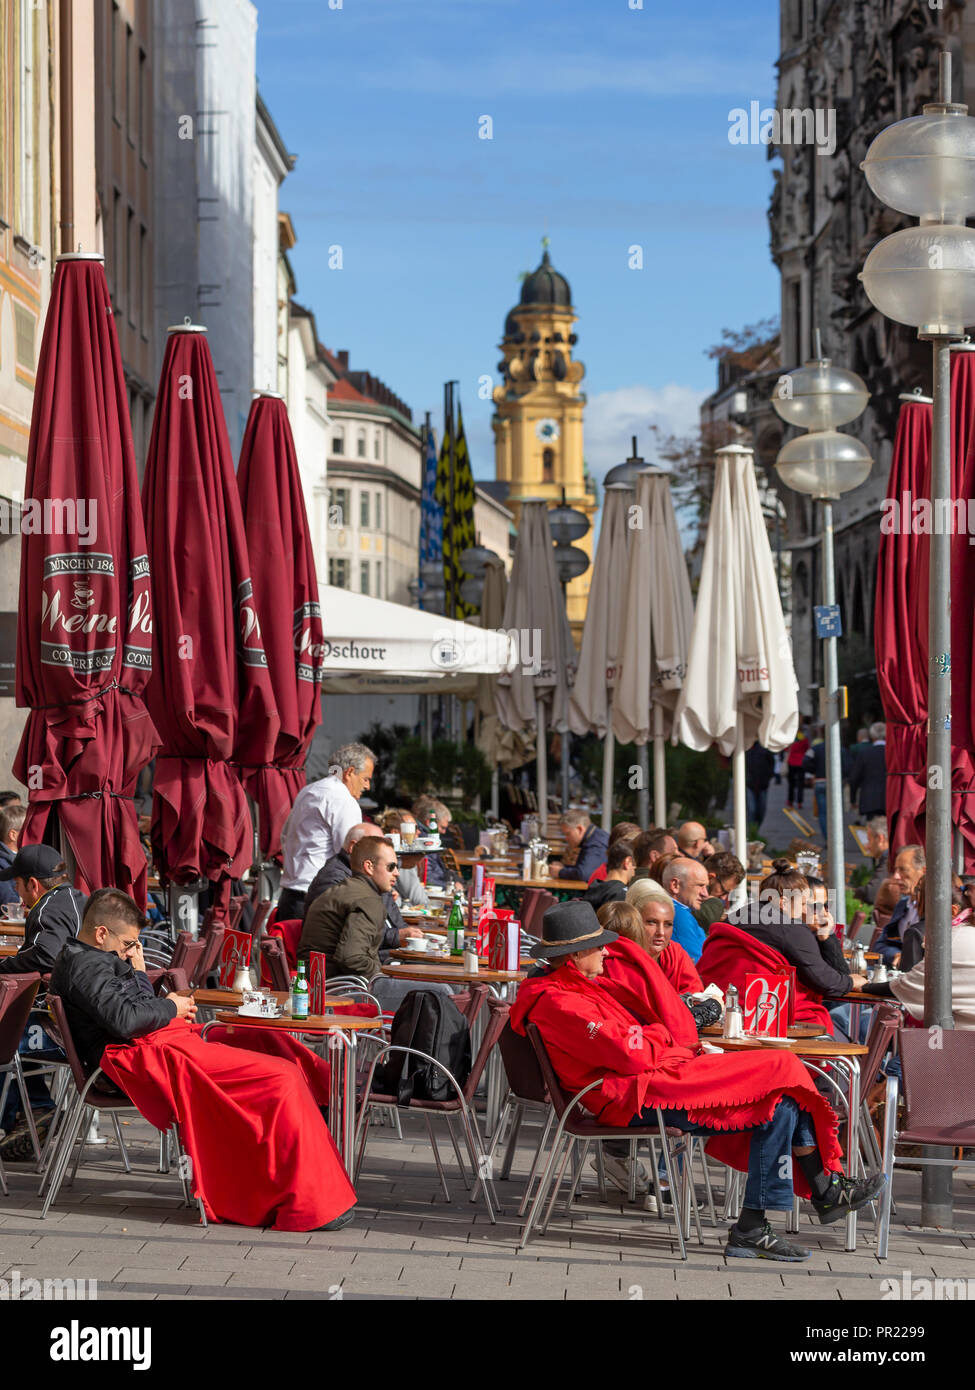 Guests of an outdoor café at Marienplatz in Munich, Germany enjoy late summer sunshine with Theatinerkirche in the background Stock Photo